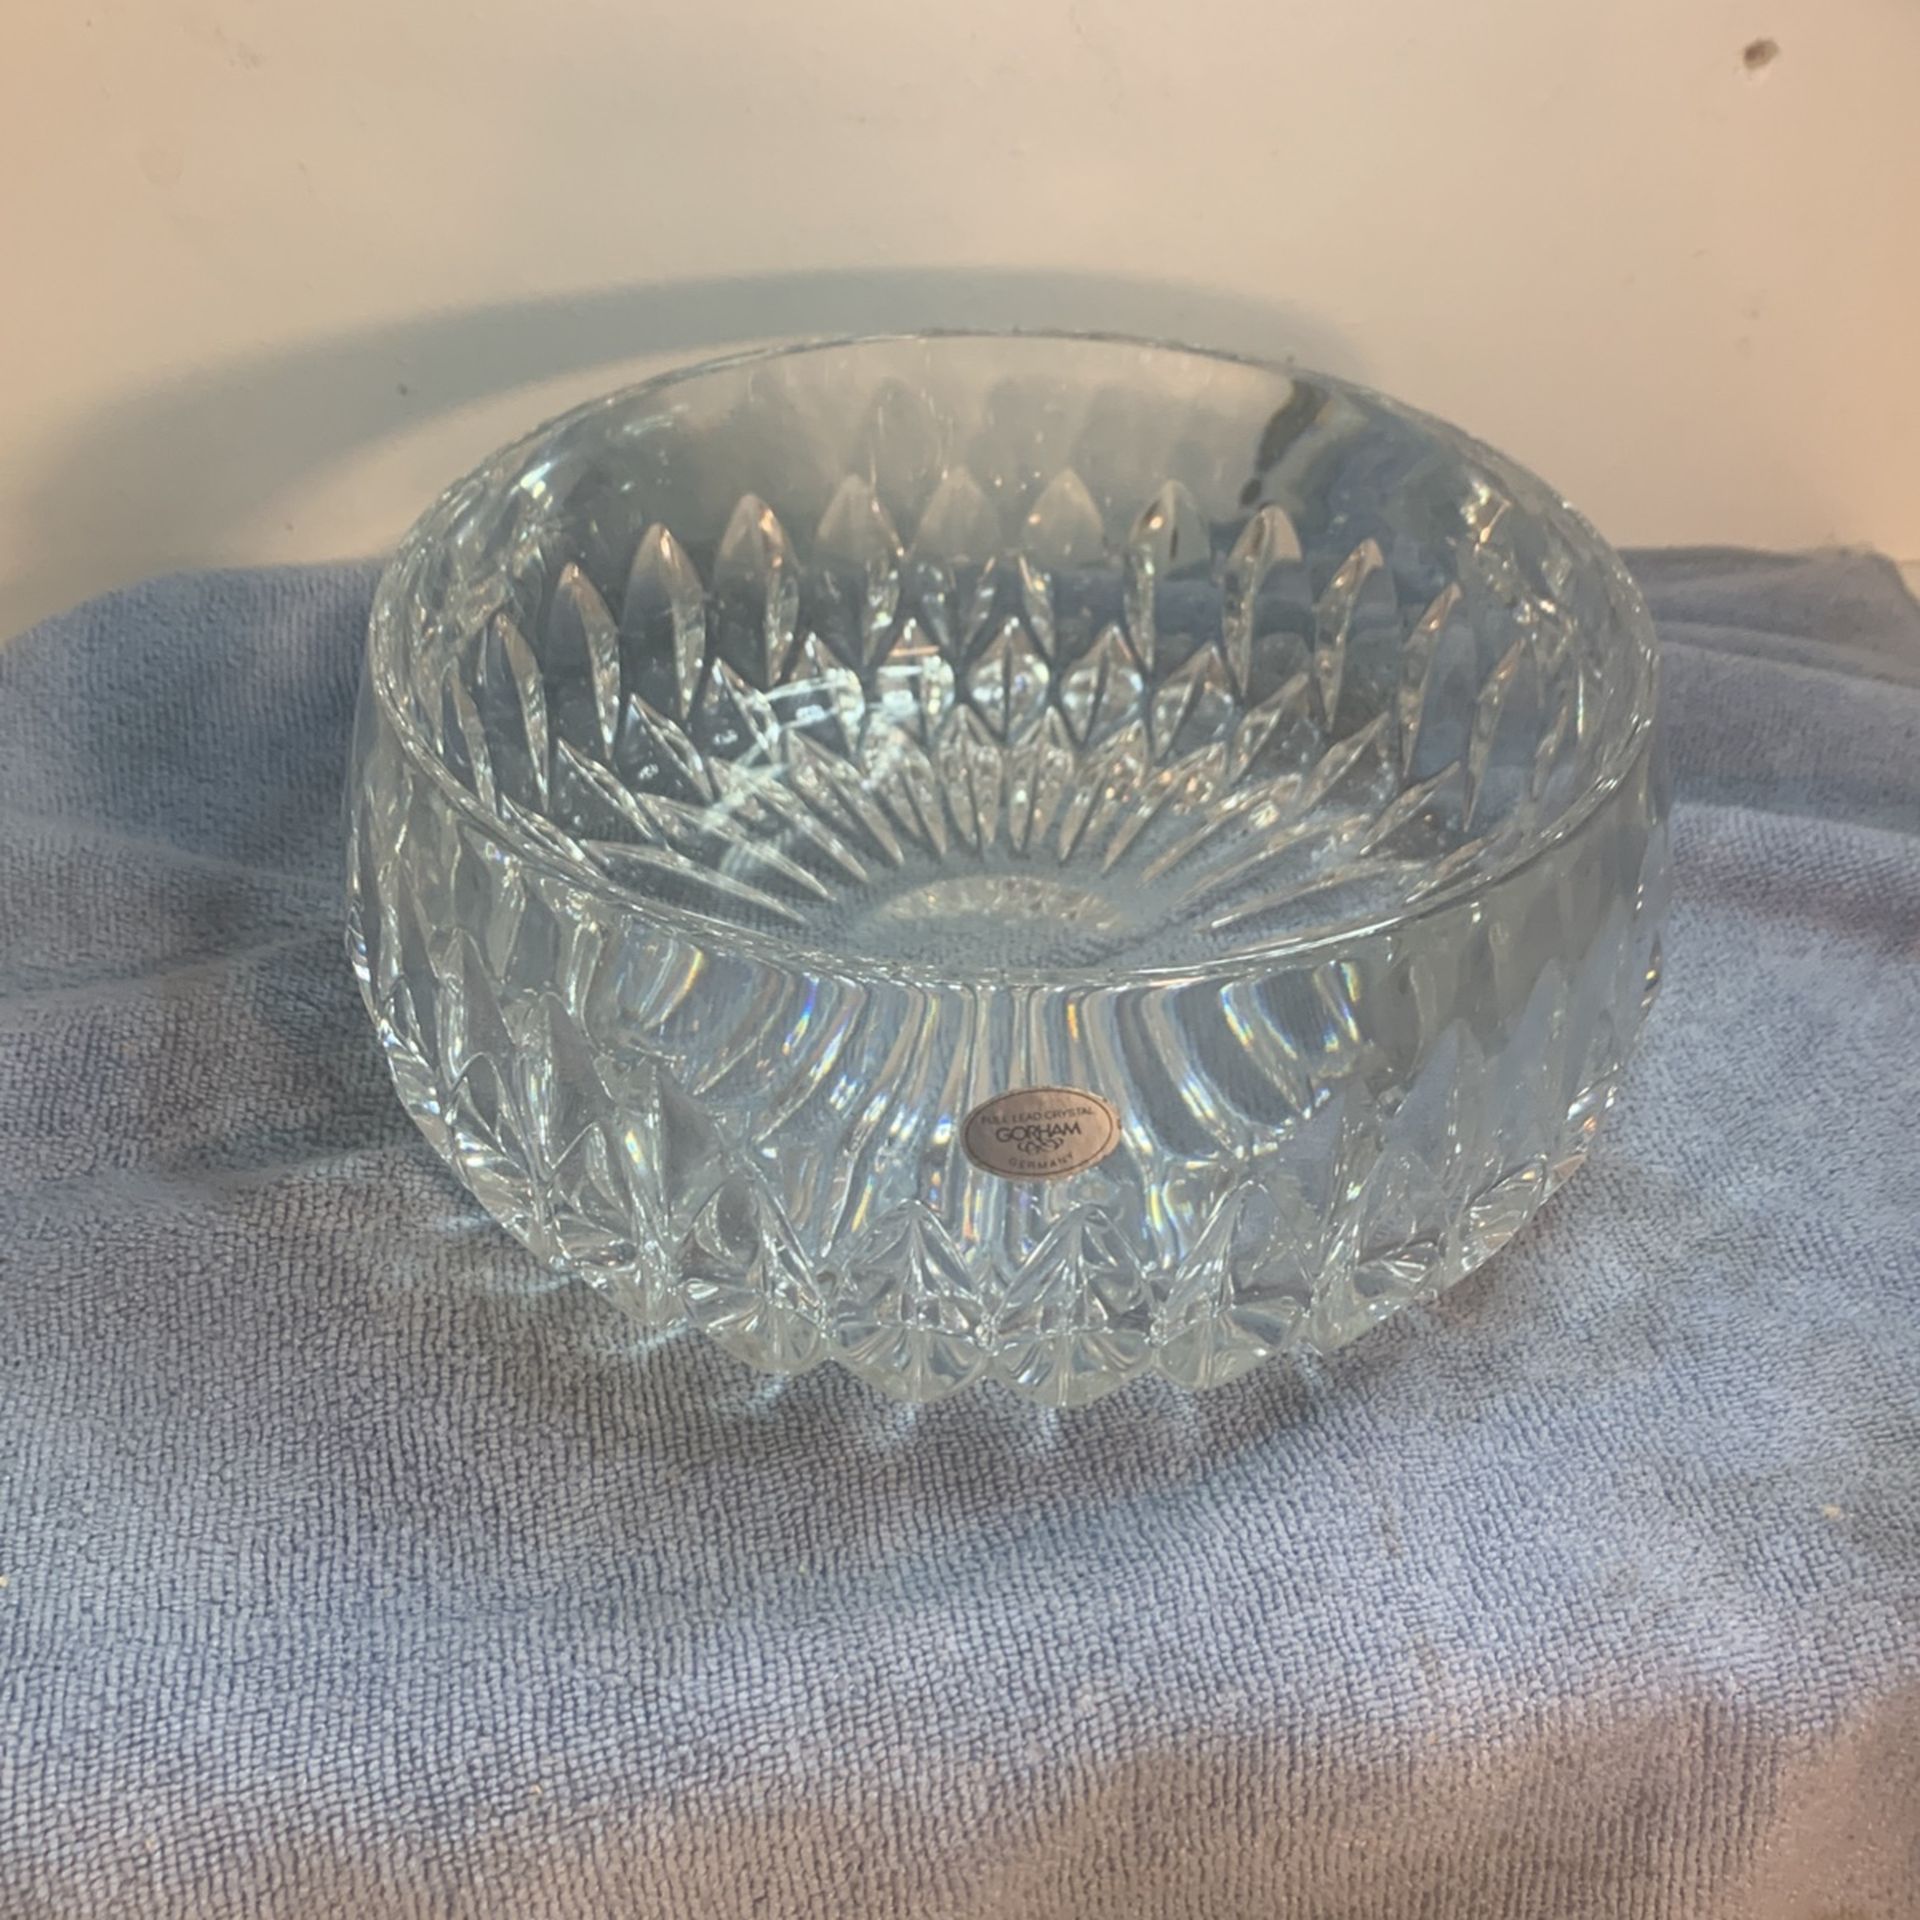 Lead crystal candy dish made in Germany $75 or best offer